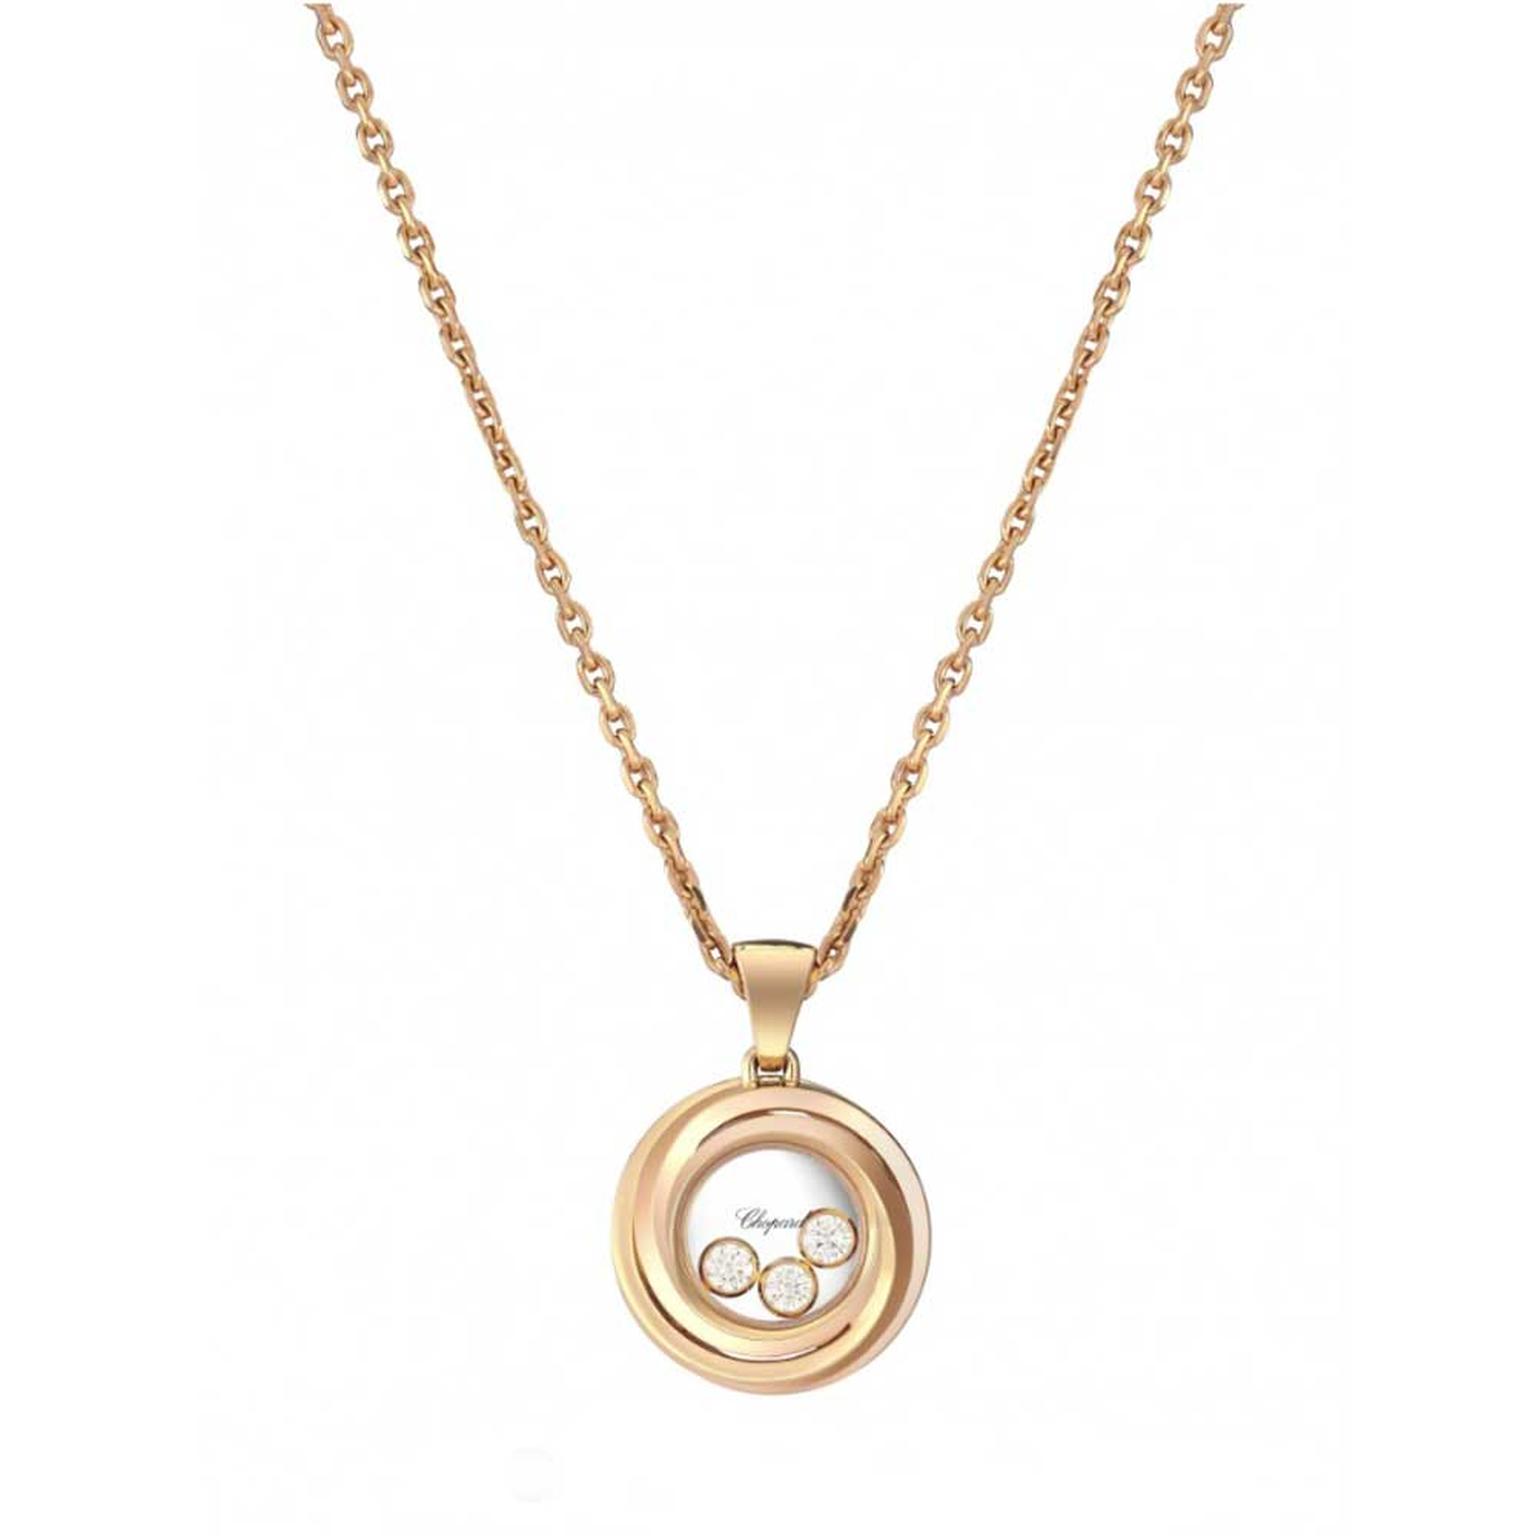 Chopard Happy Diamonds necklace in rose gold